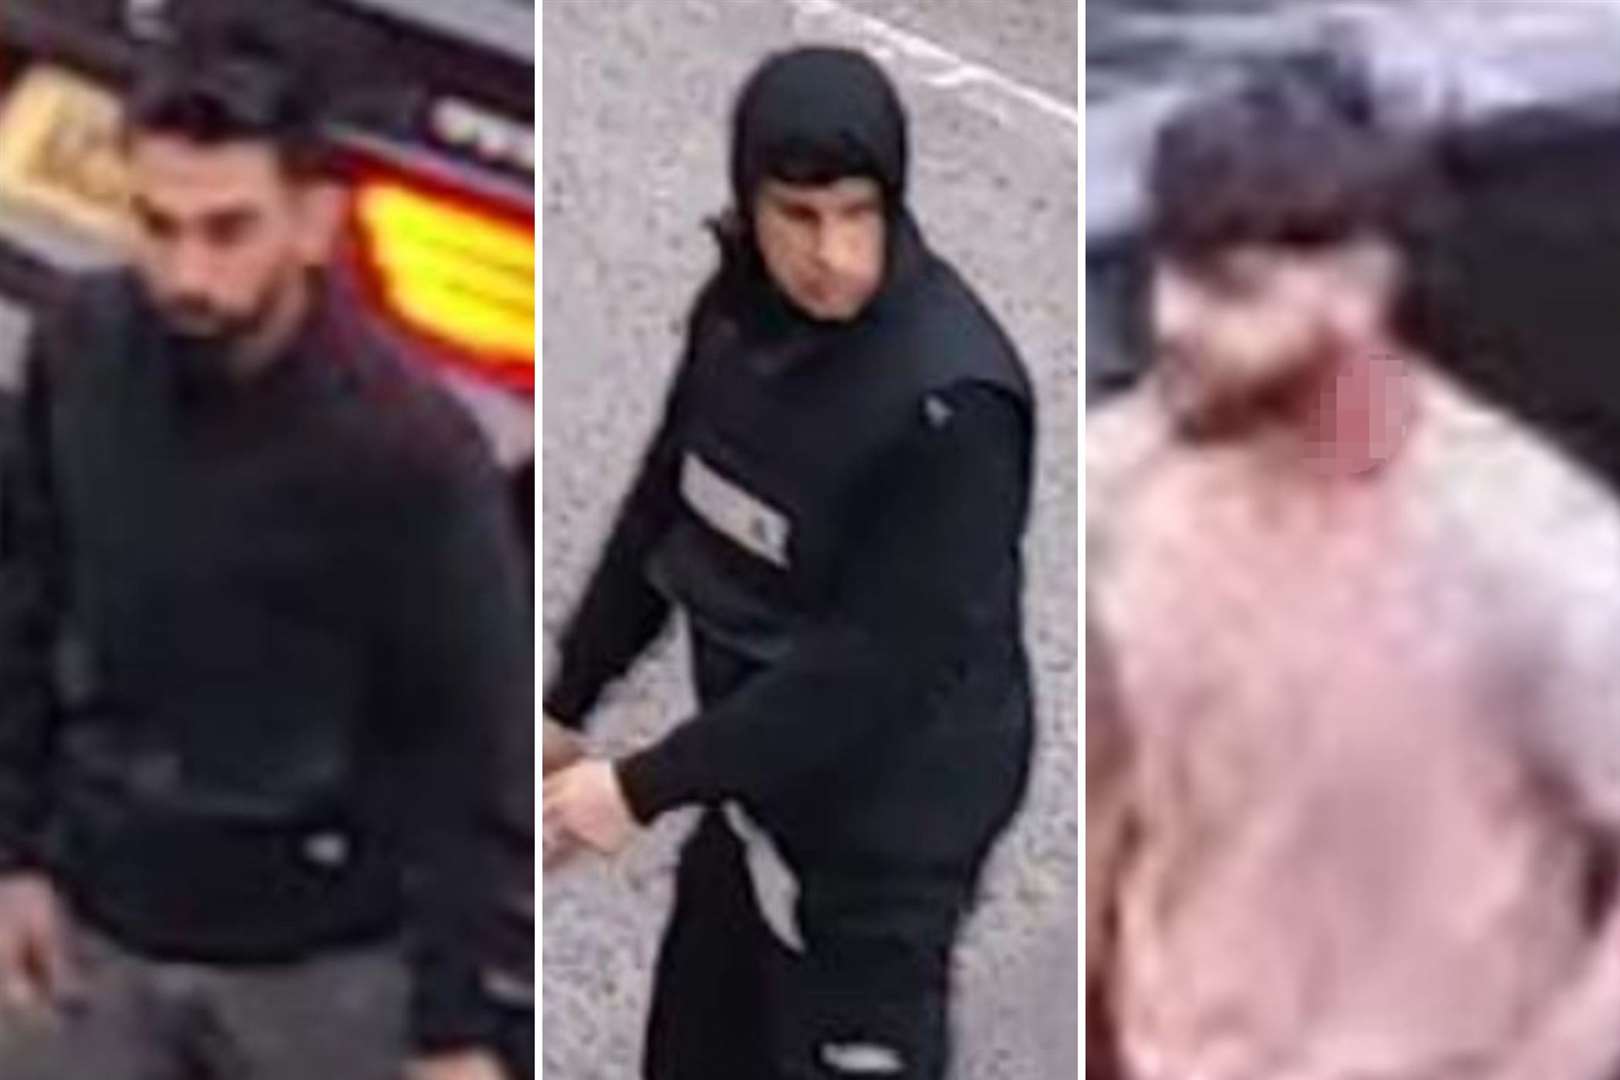 Pictures have been released of three men after a brawl in Canterbury. Picture: Kent Police